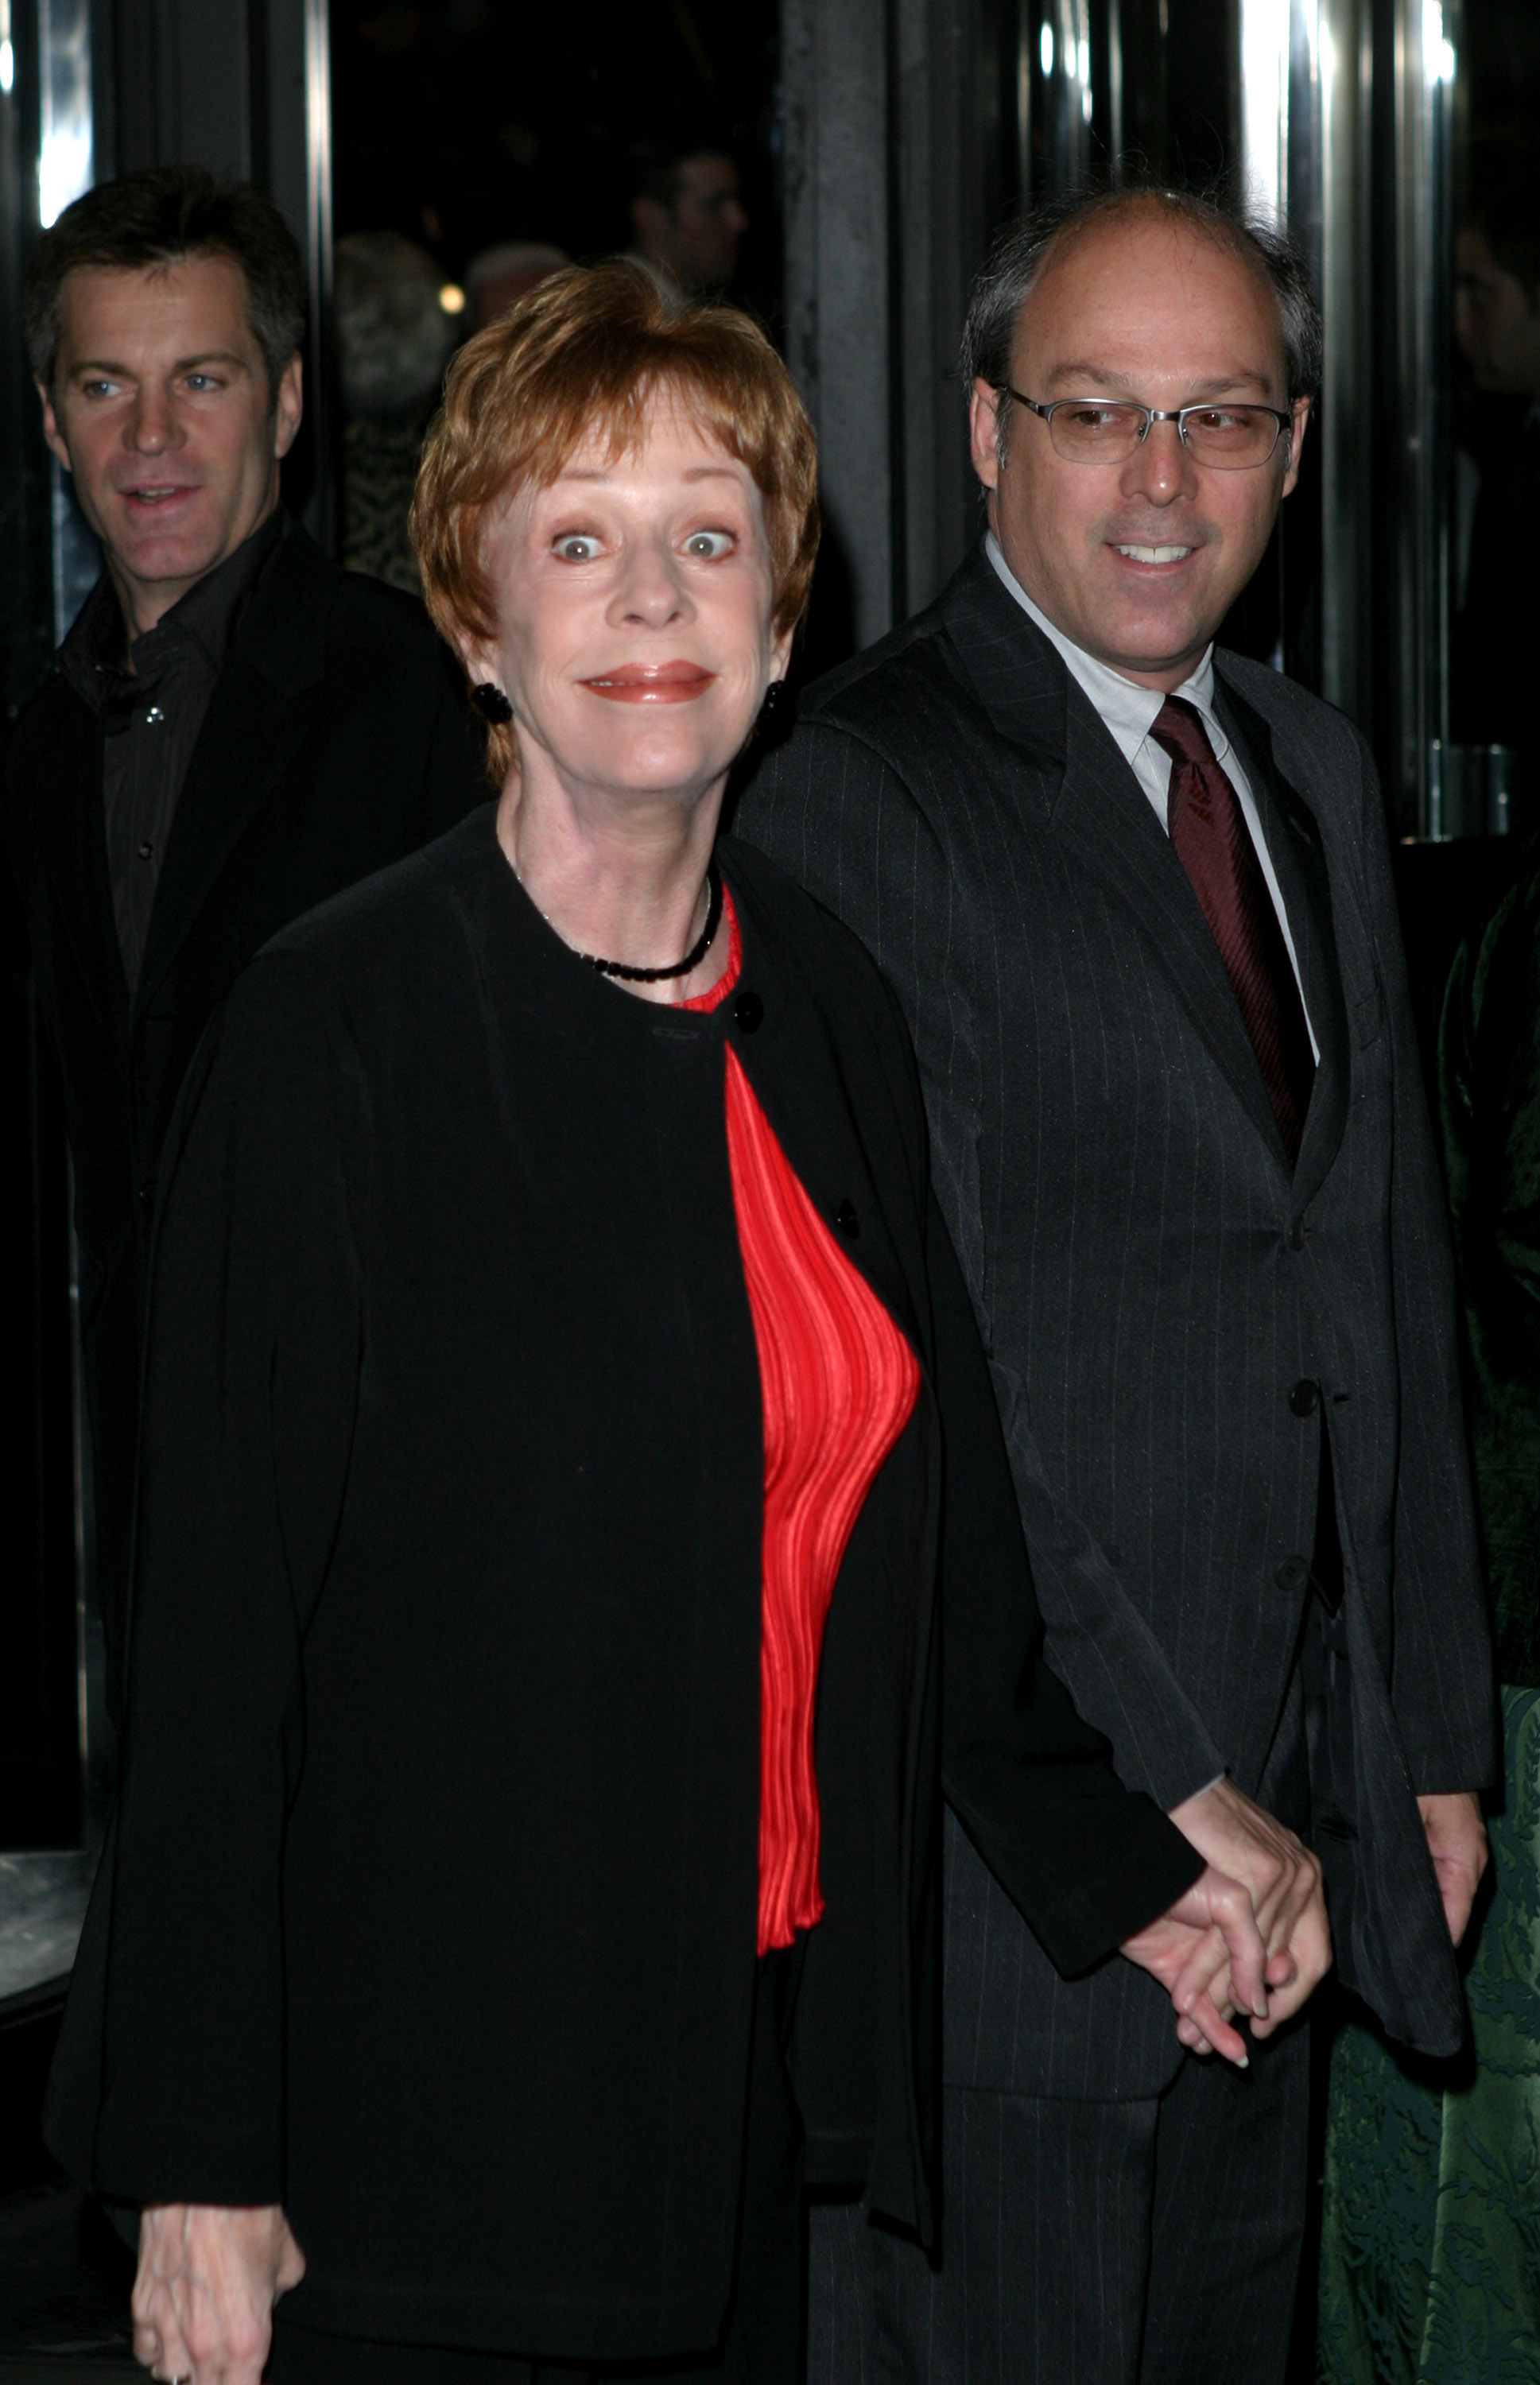 Carol Burnett and Brian Miller at Gershwin Theatre in New York City, New York, United States, 2003 | Source: Getty Images